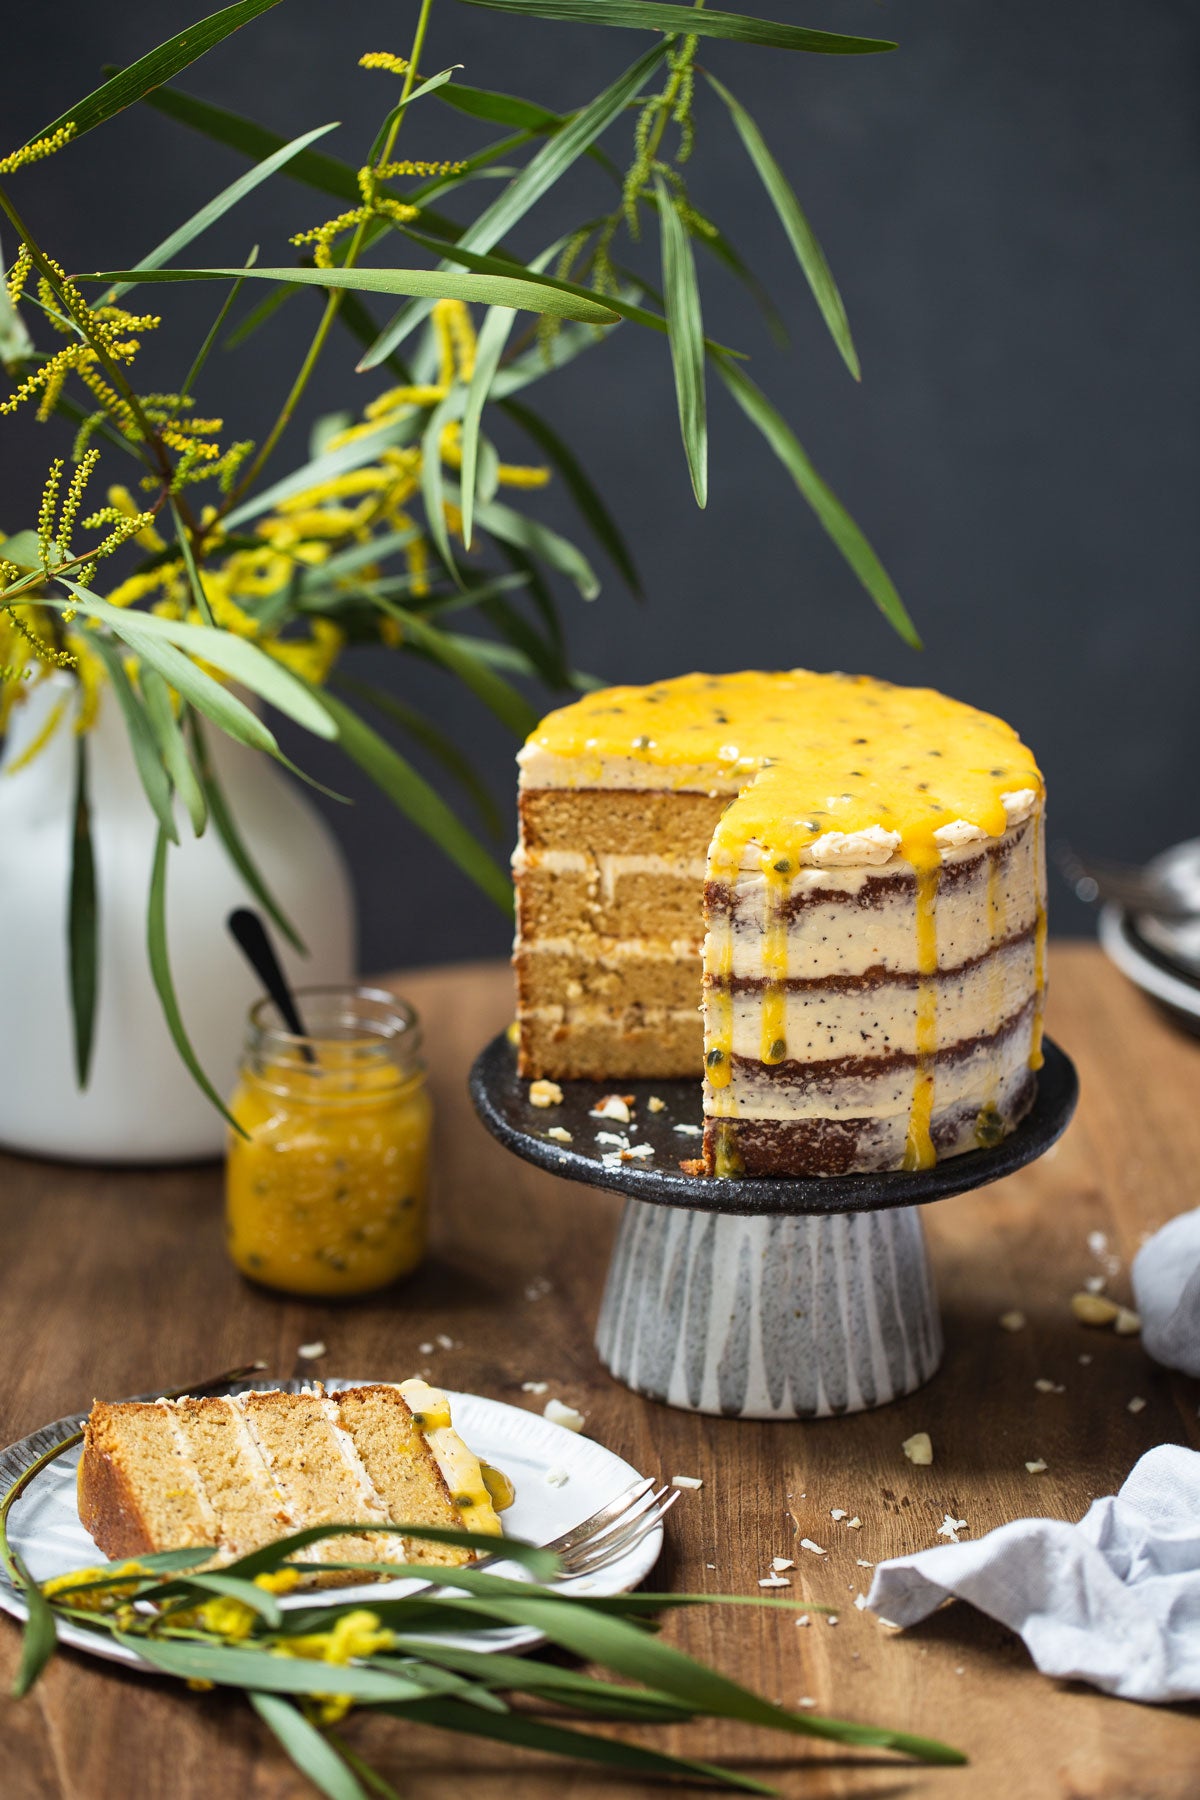 The cake is in the background and a slice of the cake is on the plate in front.  There is a mason jar of passionfruit curd in the background and behind that is a bunch of wattle.